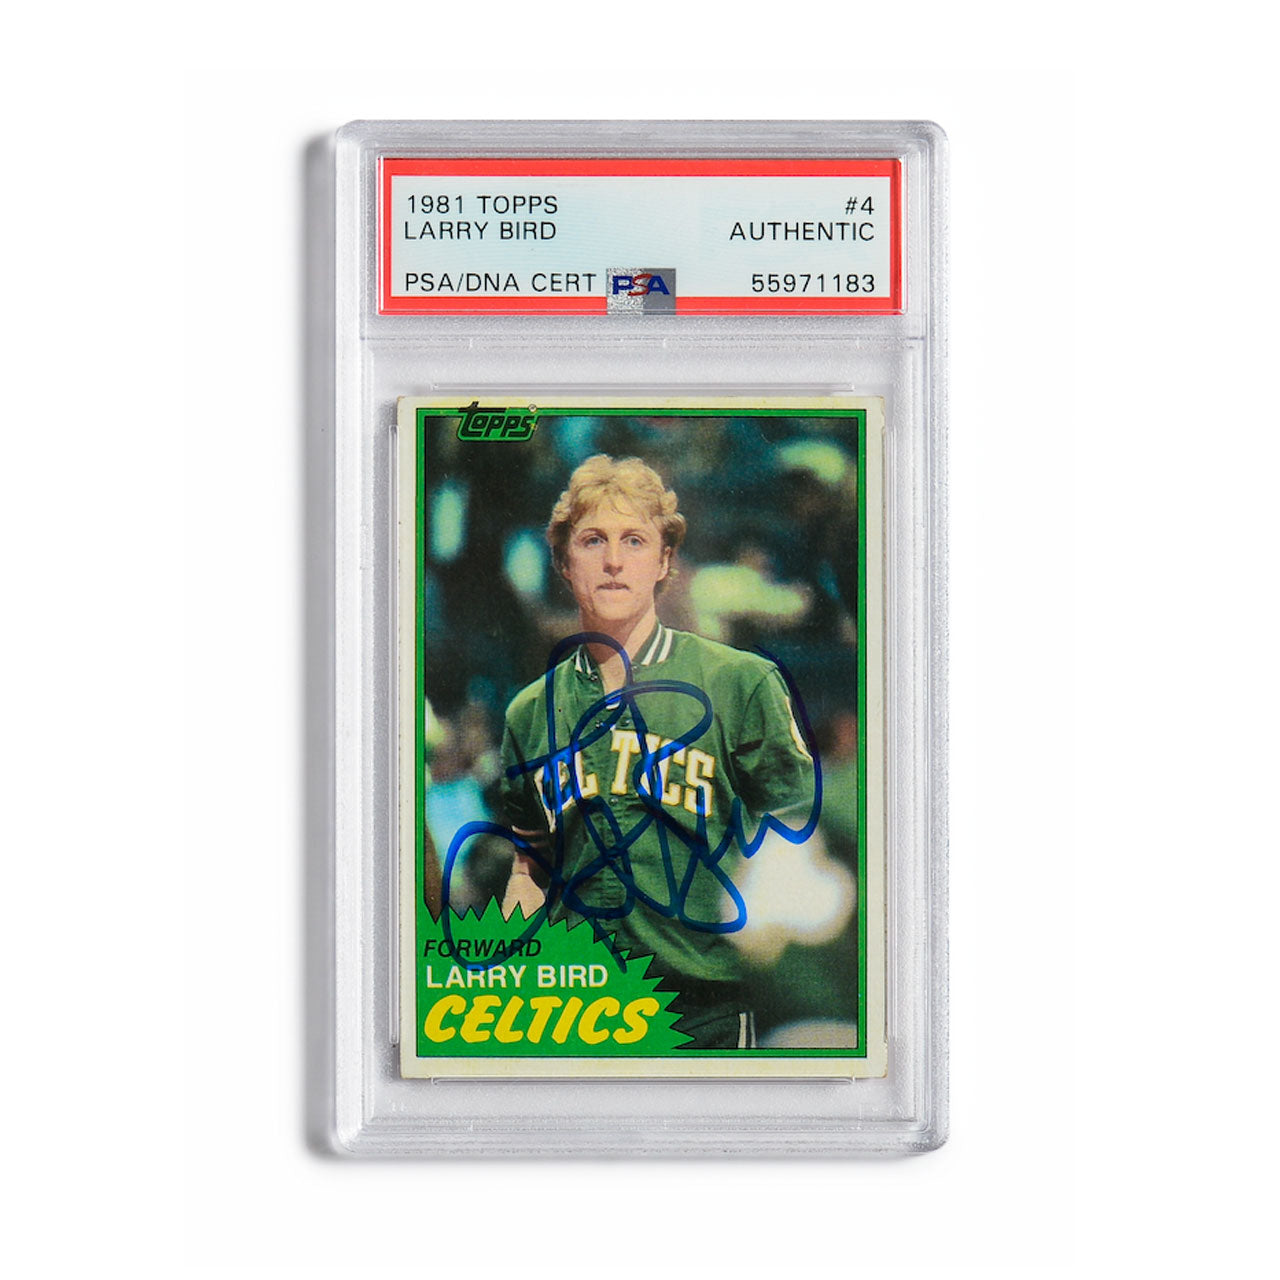 1981 Topps Larry Bird Autographed Basketball Card